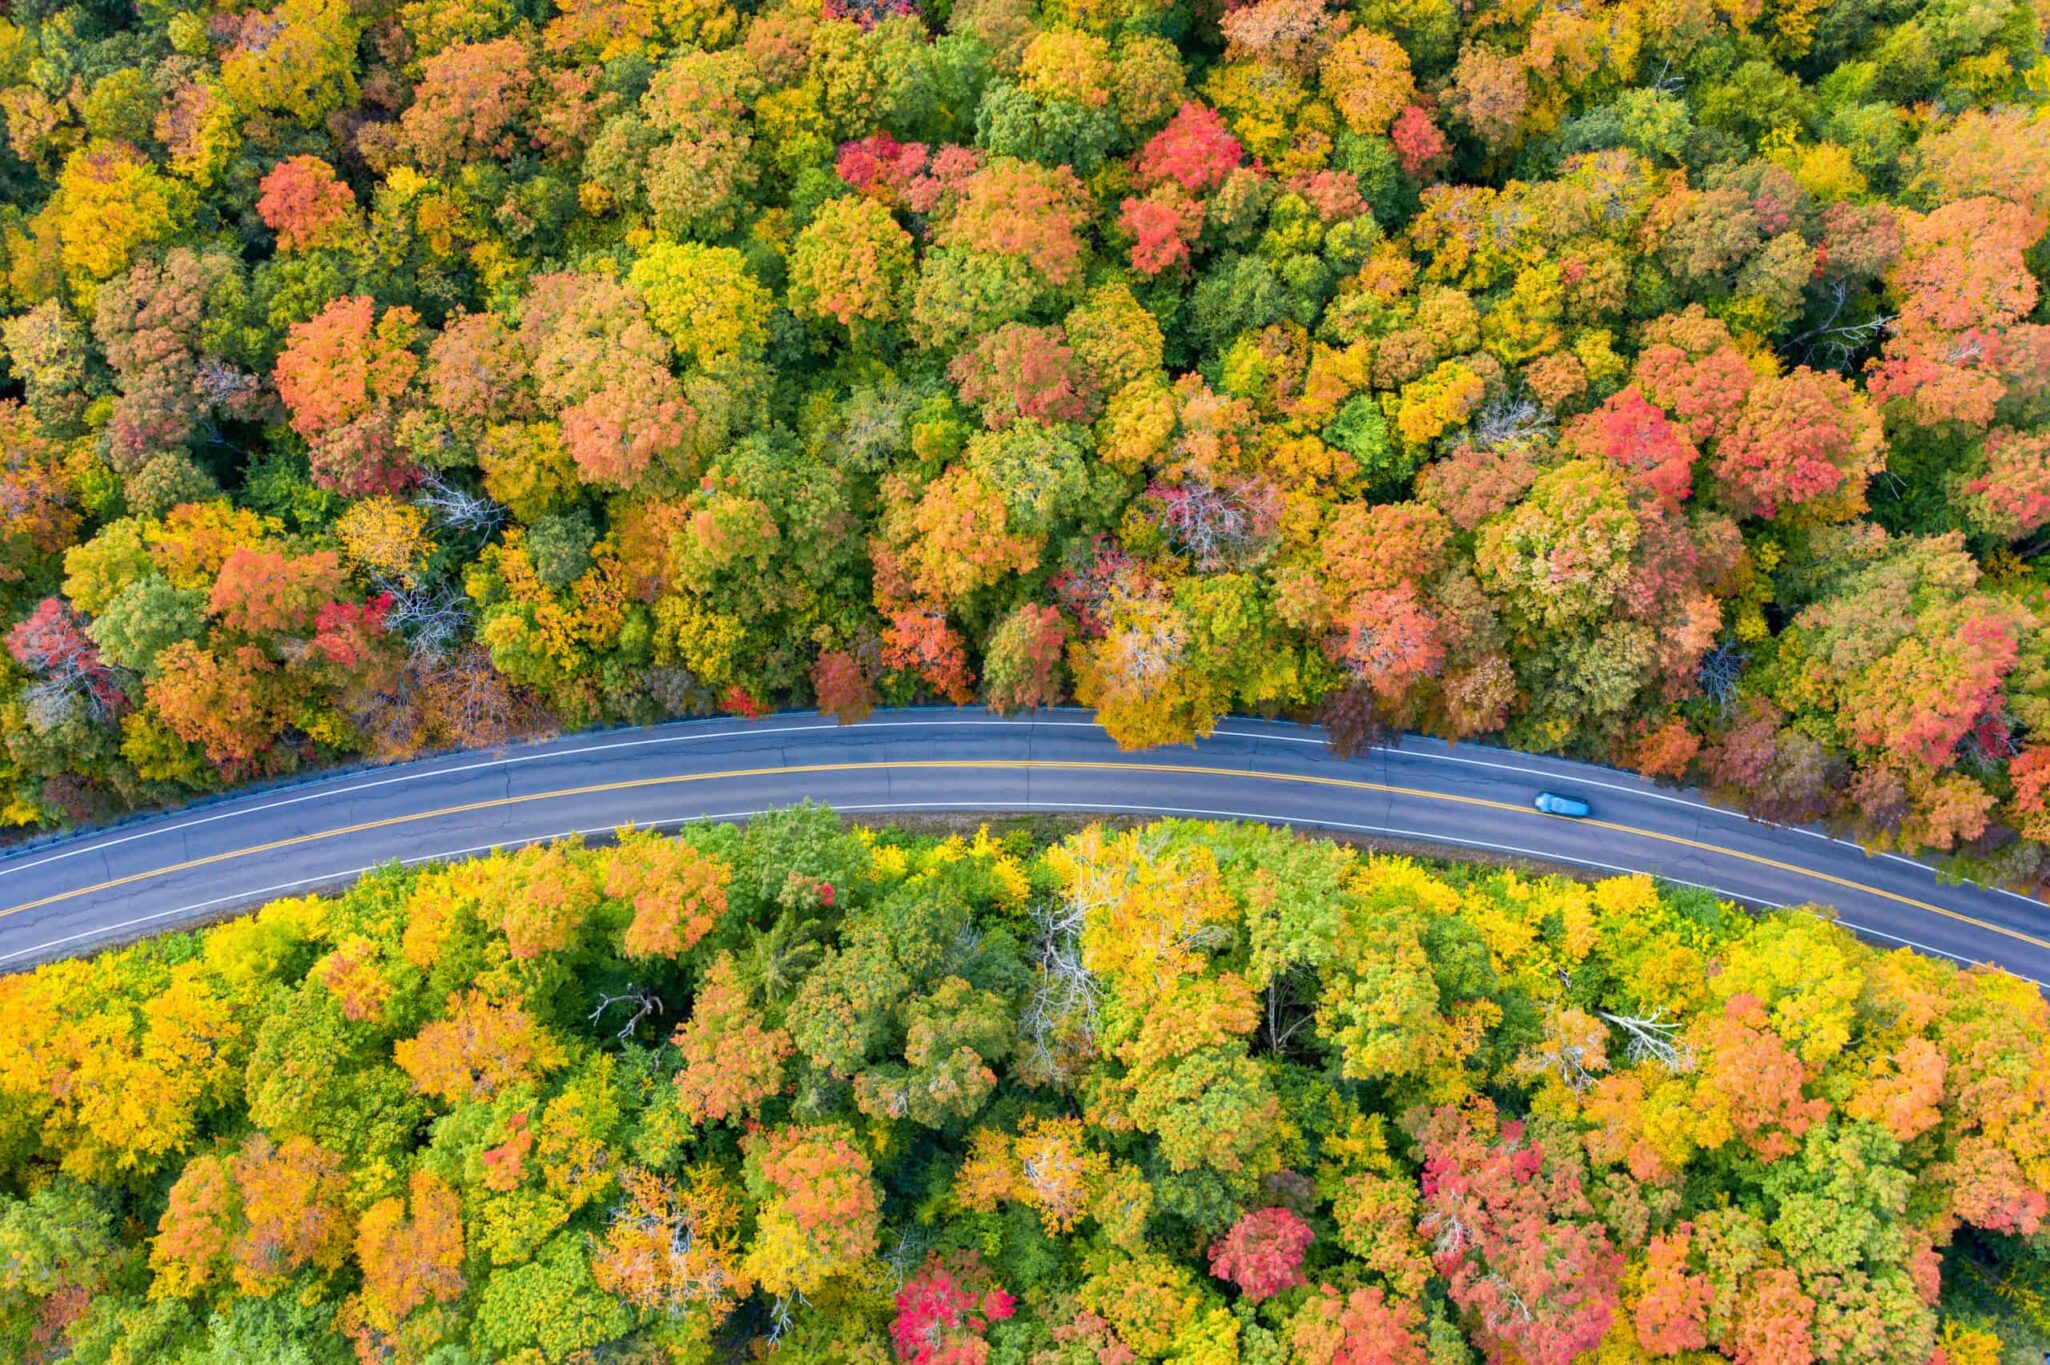 a car driving on a road with forests with leaves changing colors on either side of the road